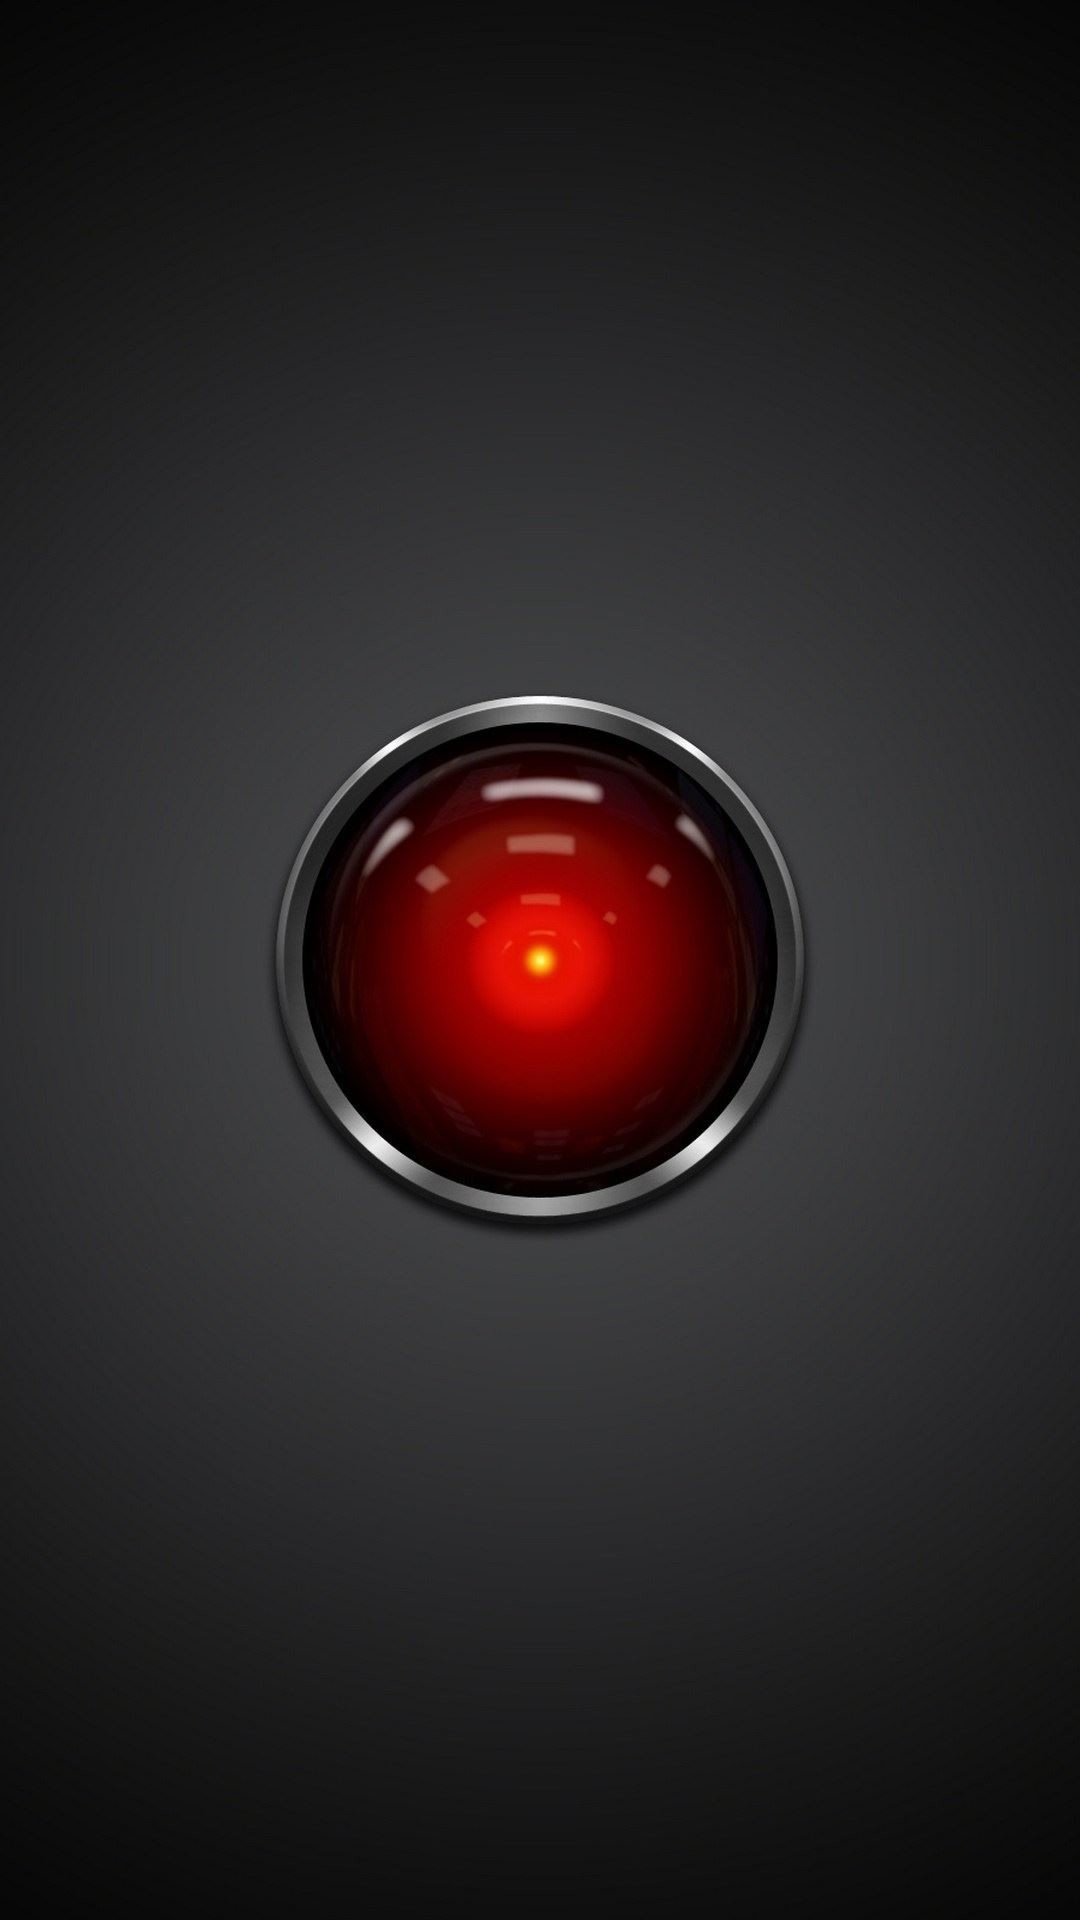 1080x1920 HAL 9000 2001 A Space Odyssey iPhone 6 Plus HD Wallpaper ...